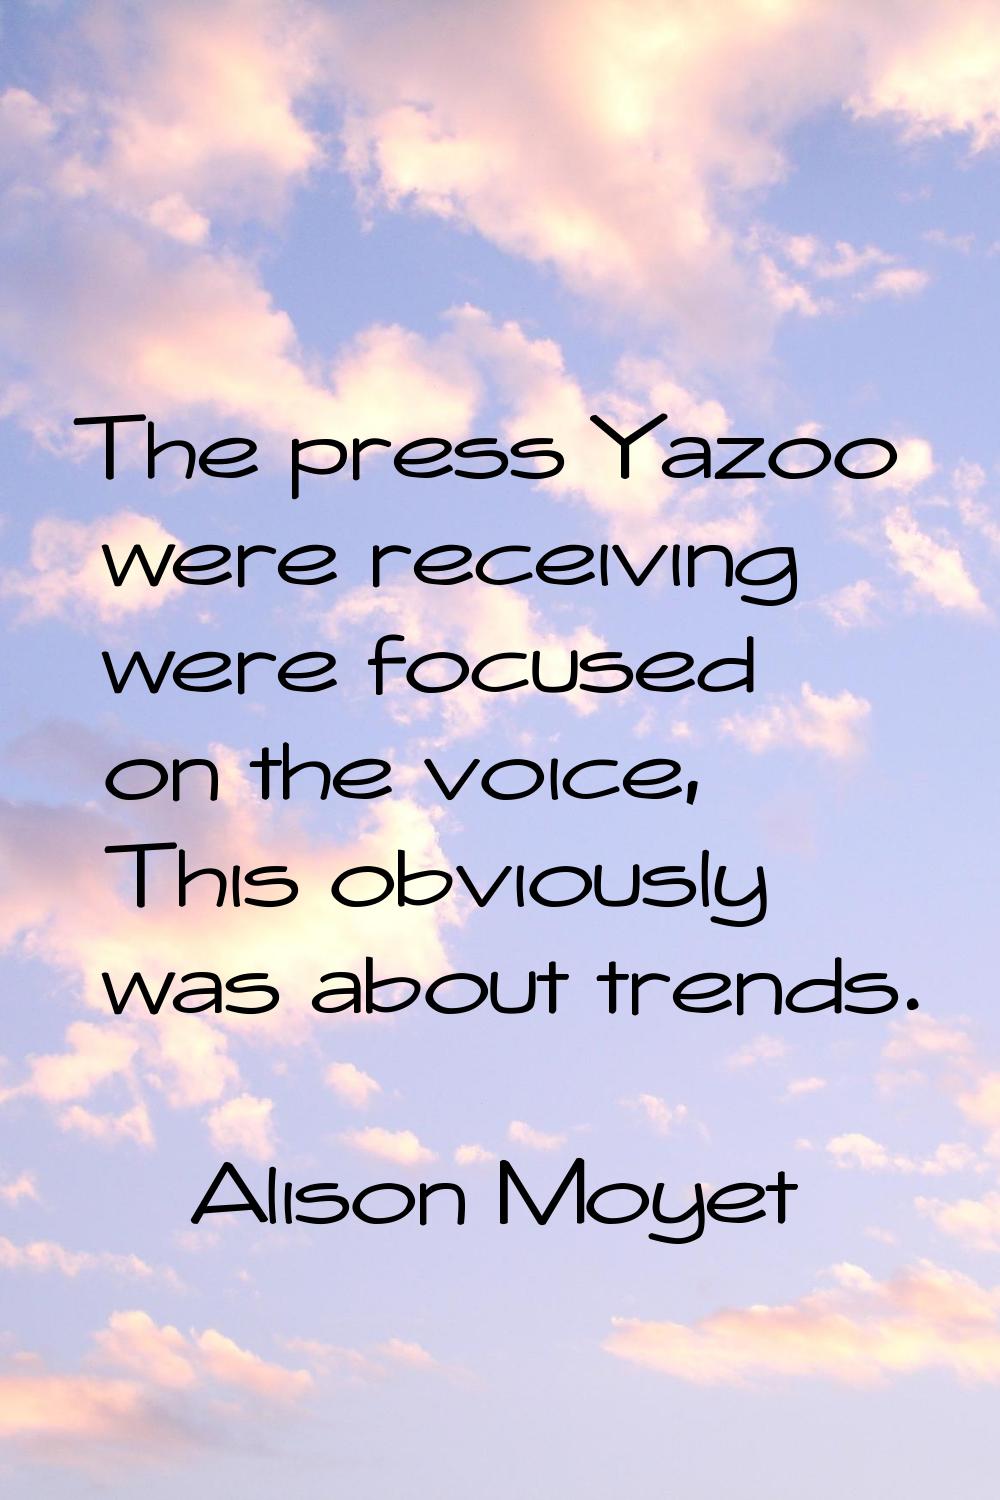 The press Yazoo were receiving were focused on the voice, This obviously was about trends.